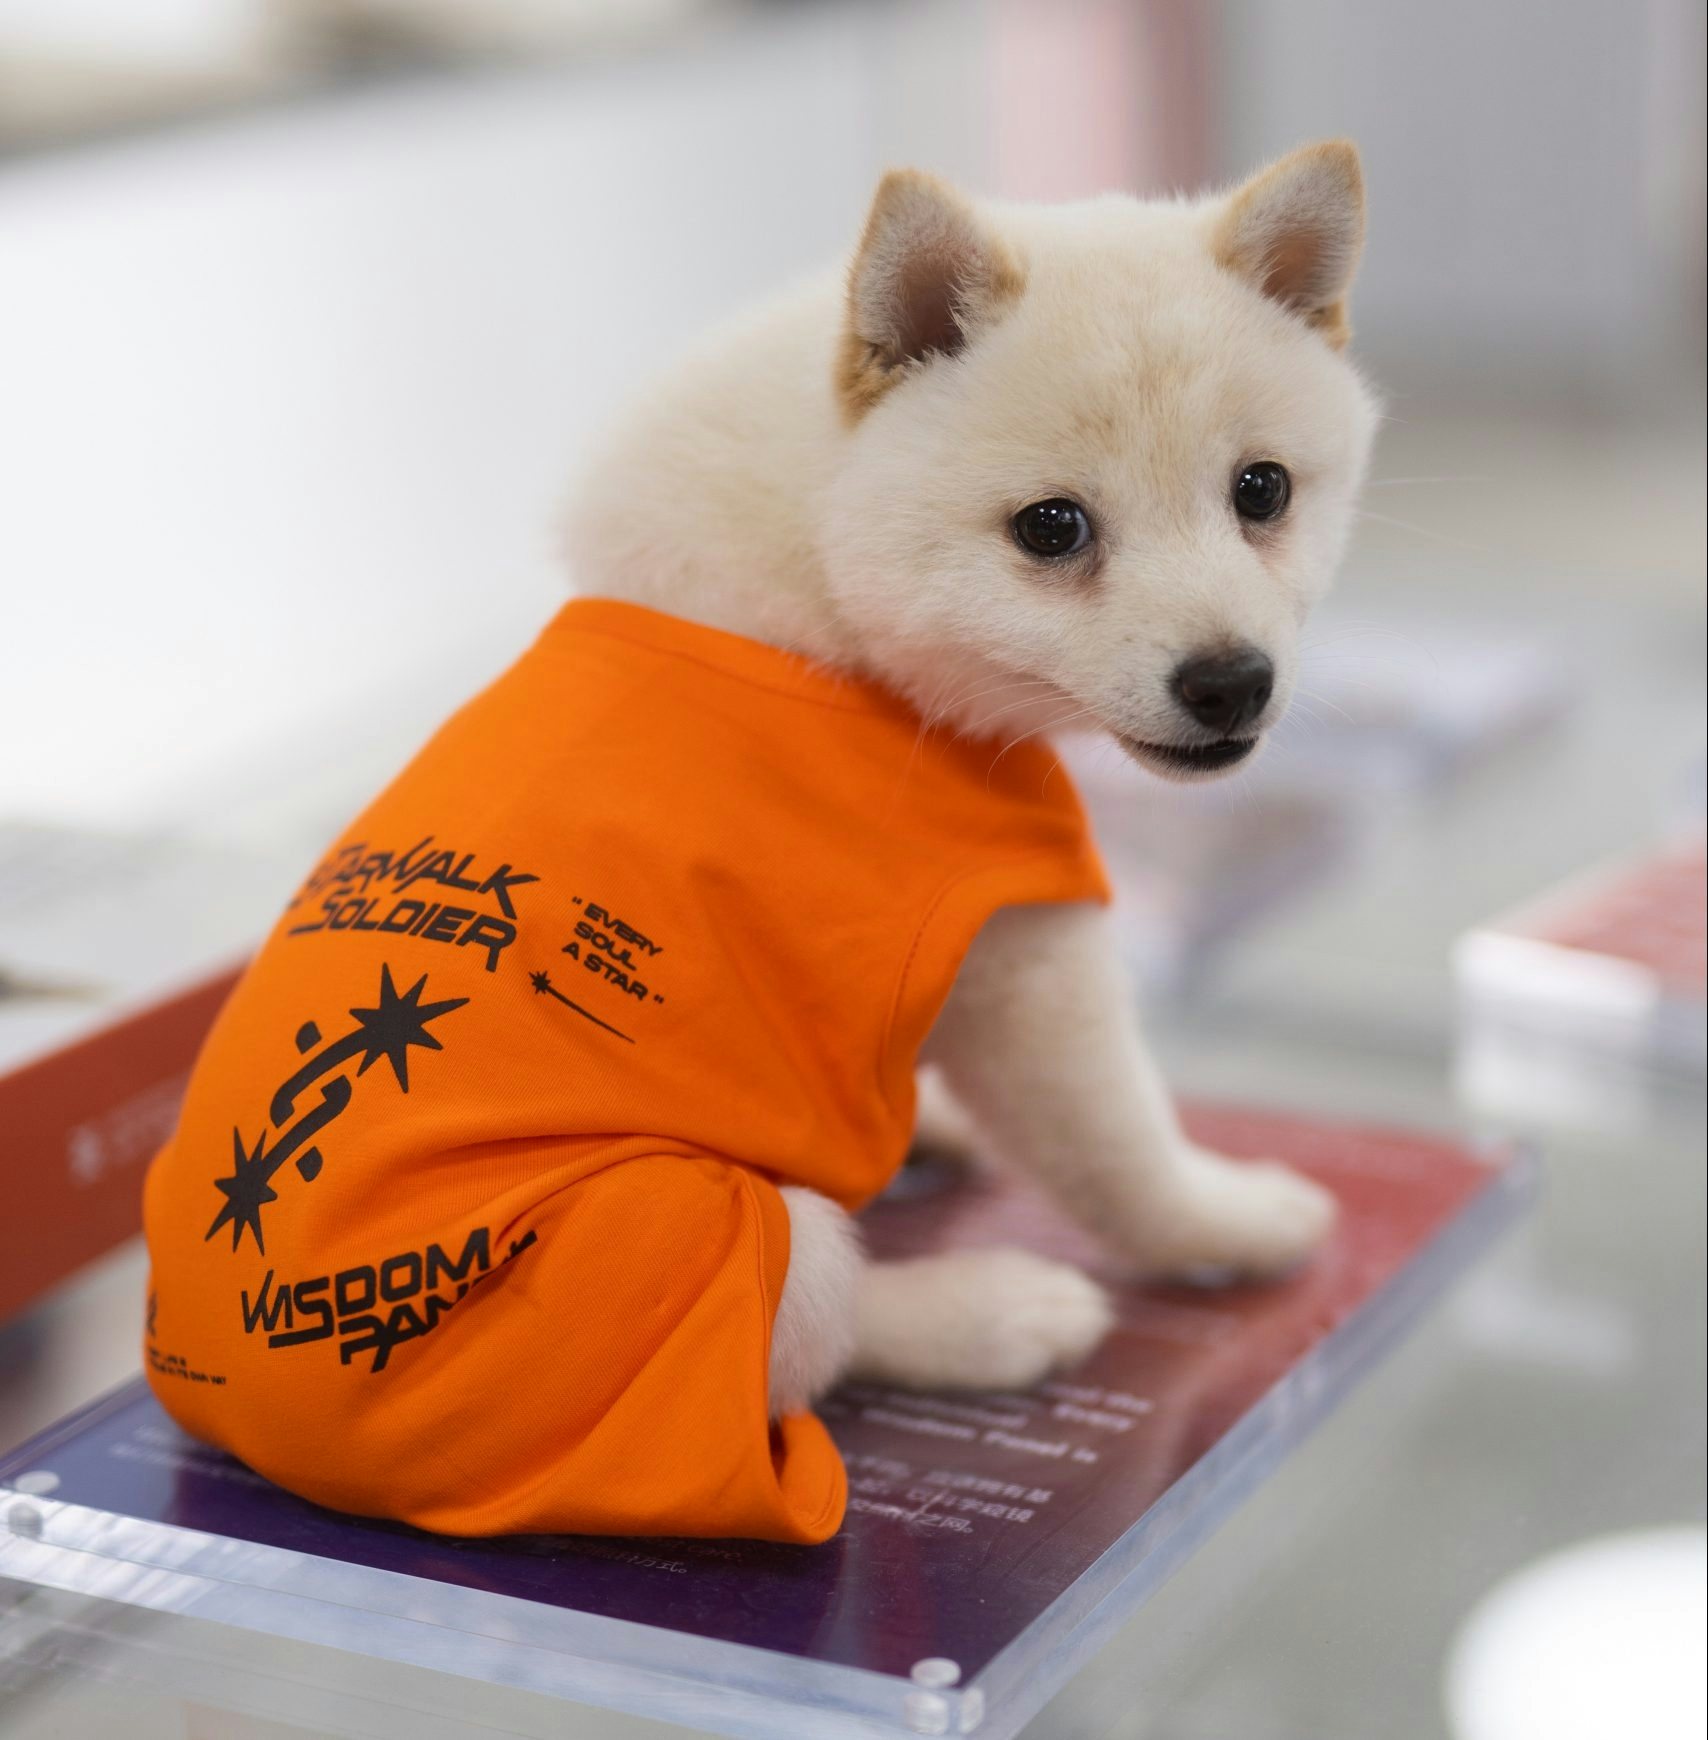 Brands are tapping into Chinas pet economy more and more. Photo: Starwalk x Wisdom Panel